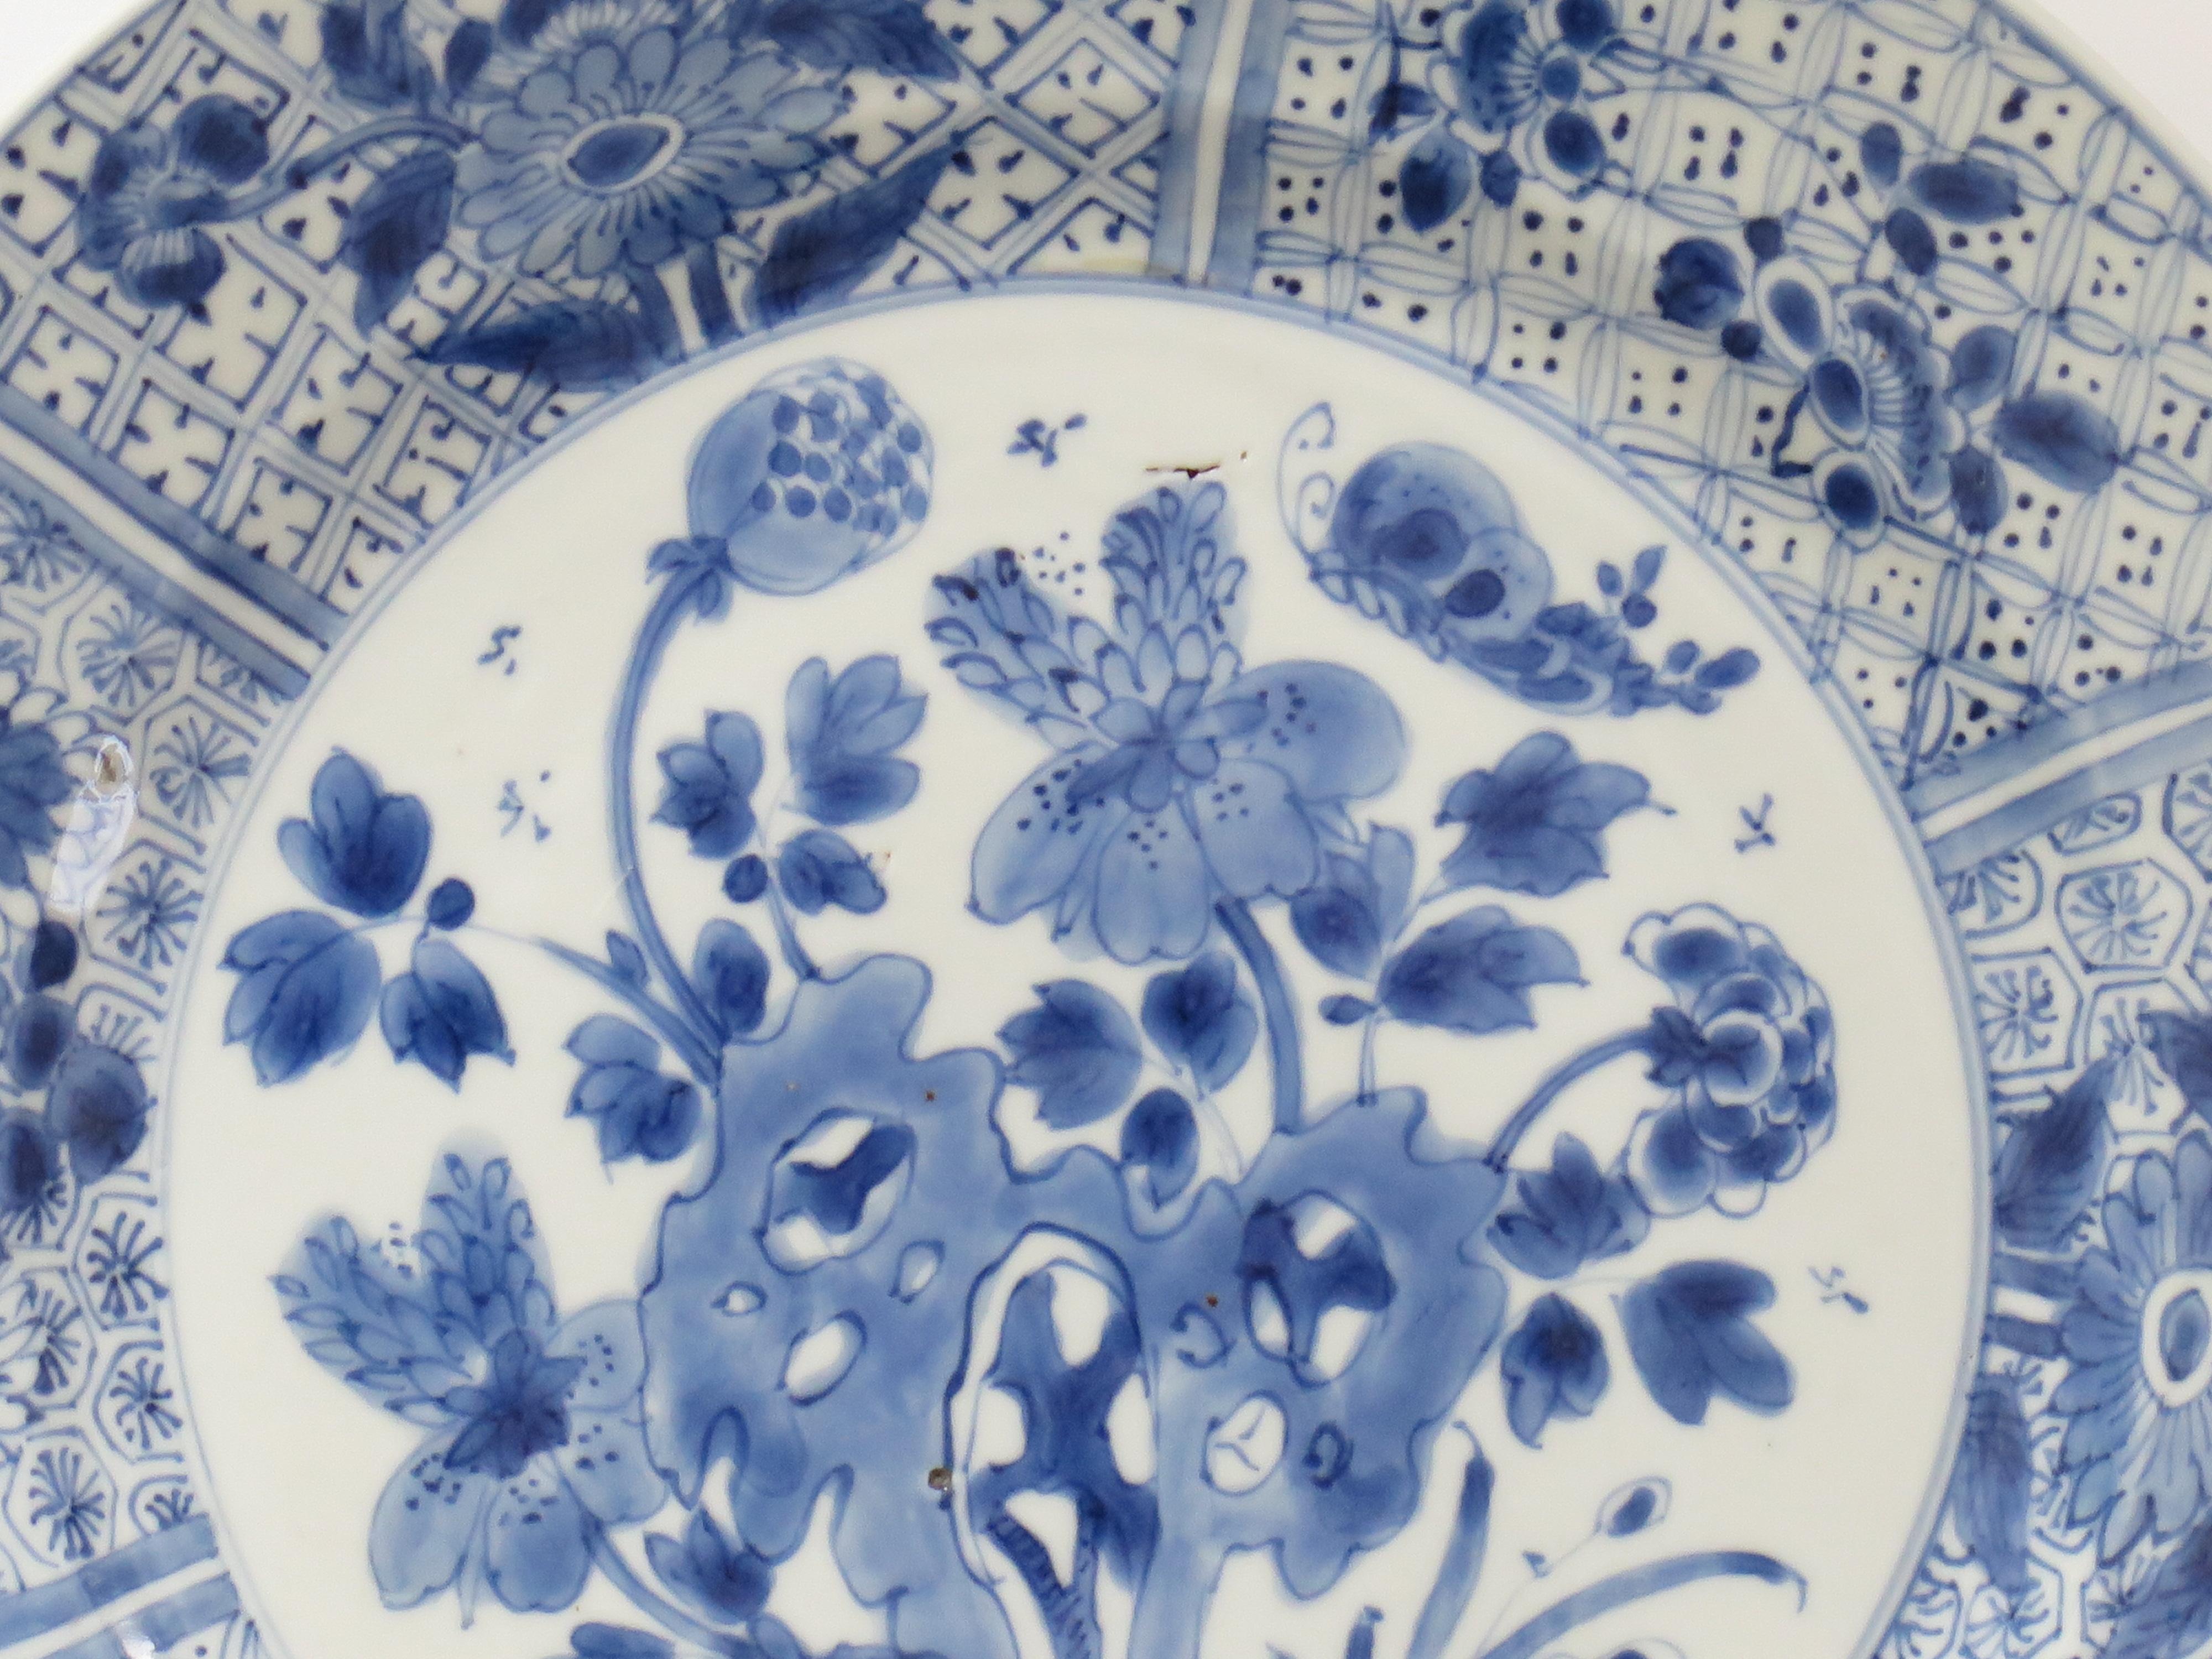 Chinese Kangxi Mark & period Plate or Dish Porcelain Blue & White, Ca 1700 For Sale 4